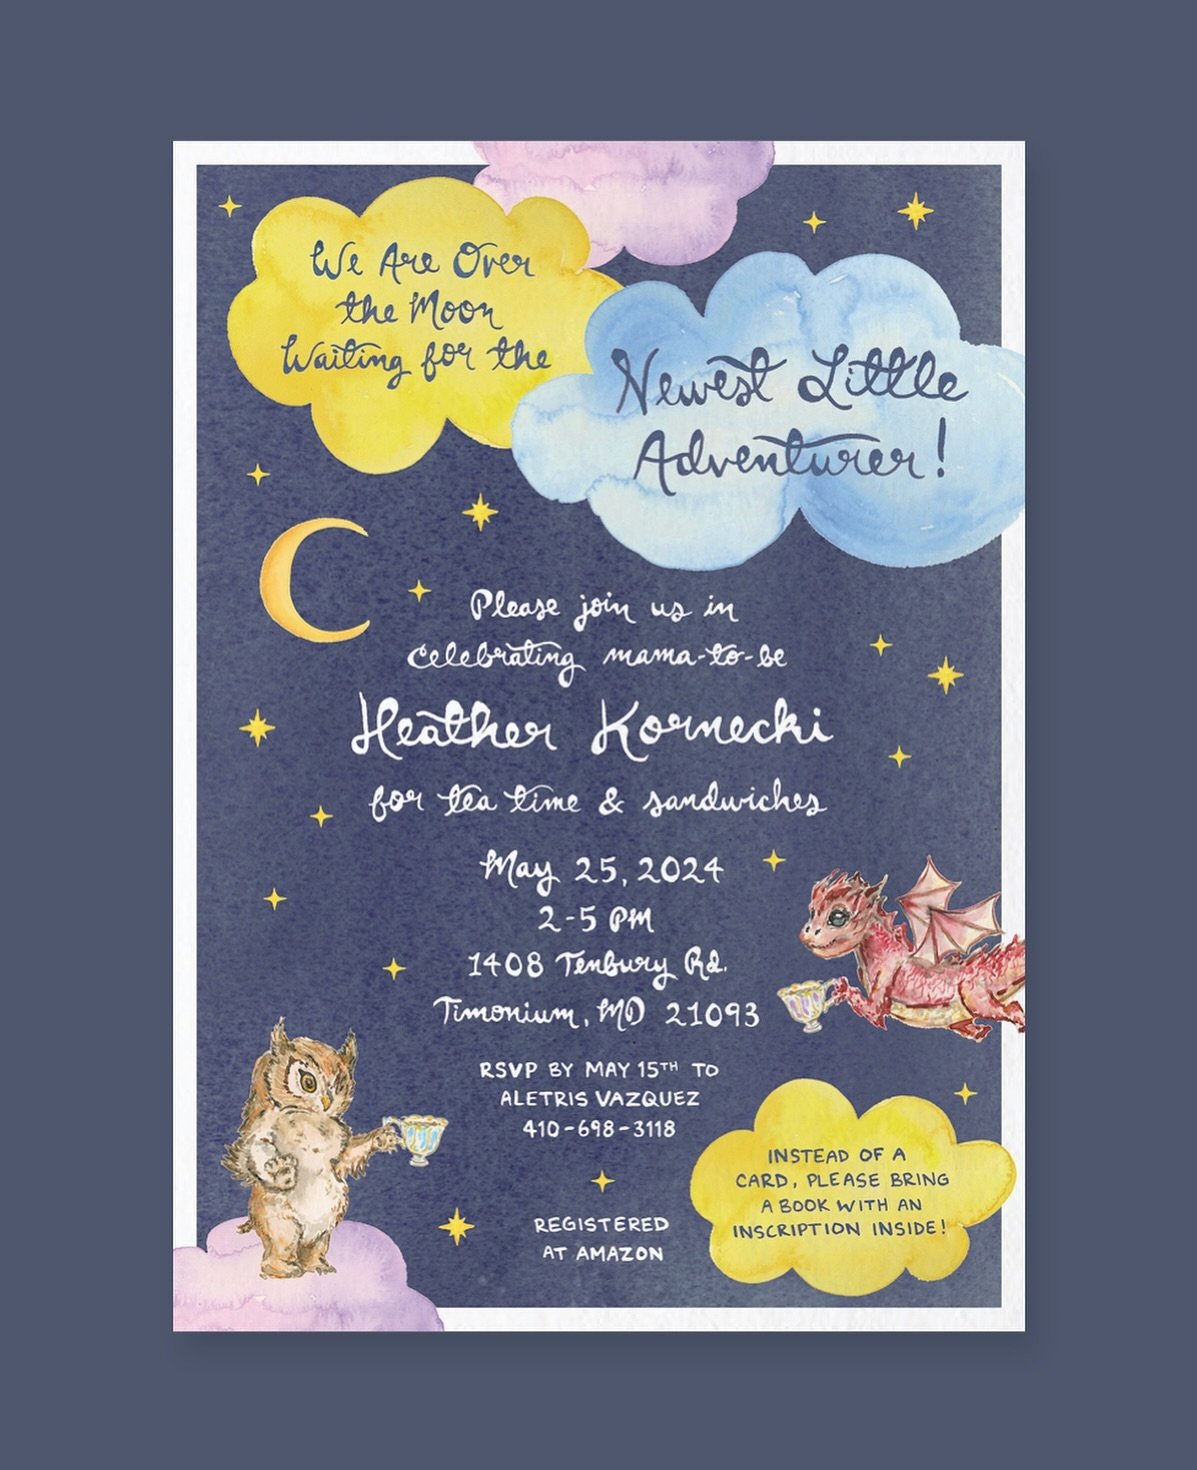 Baby shower theme: twinkle, twinkle little star meets dungeons &amp; dragons tea party 🌙  Sending good vibes to this mama to be! #twinkletwinklelittlestar #babyshowerinvitations #dungeonsanddragons #teaparty #babyshower #custominvitations #watercolo